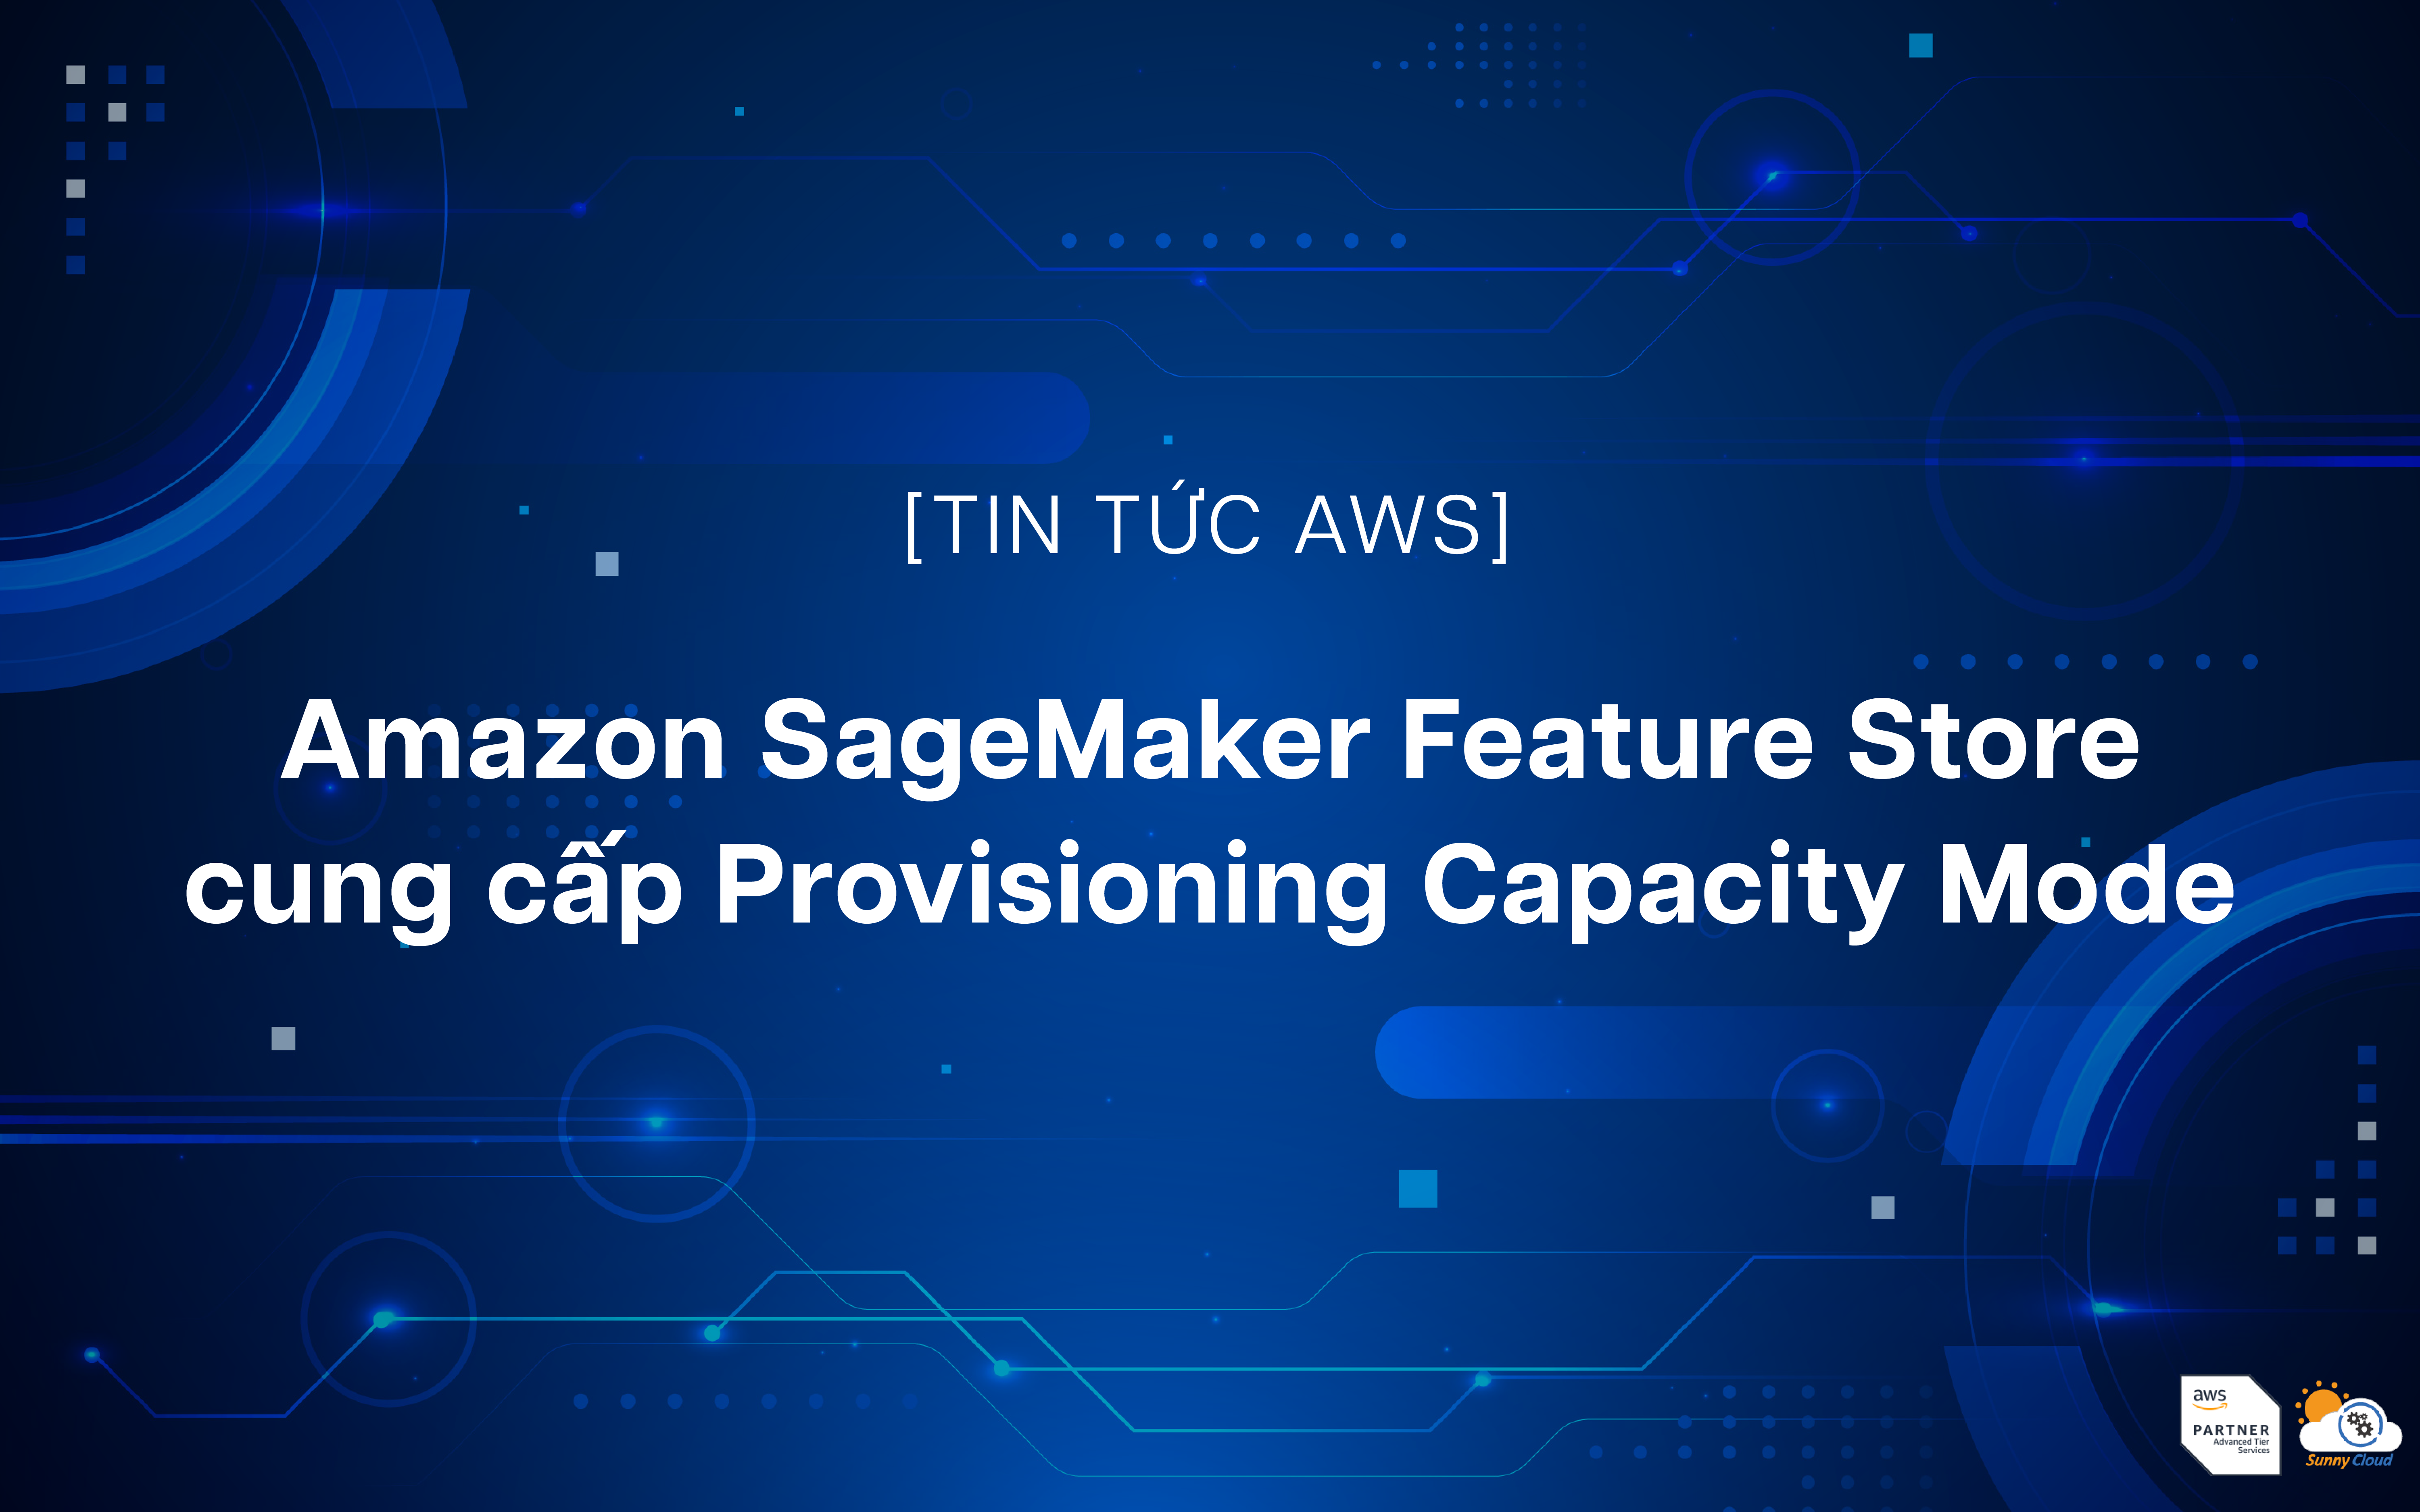 Amazon SageMaker Feature Store cung cấp Provisioning Capacity Mode